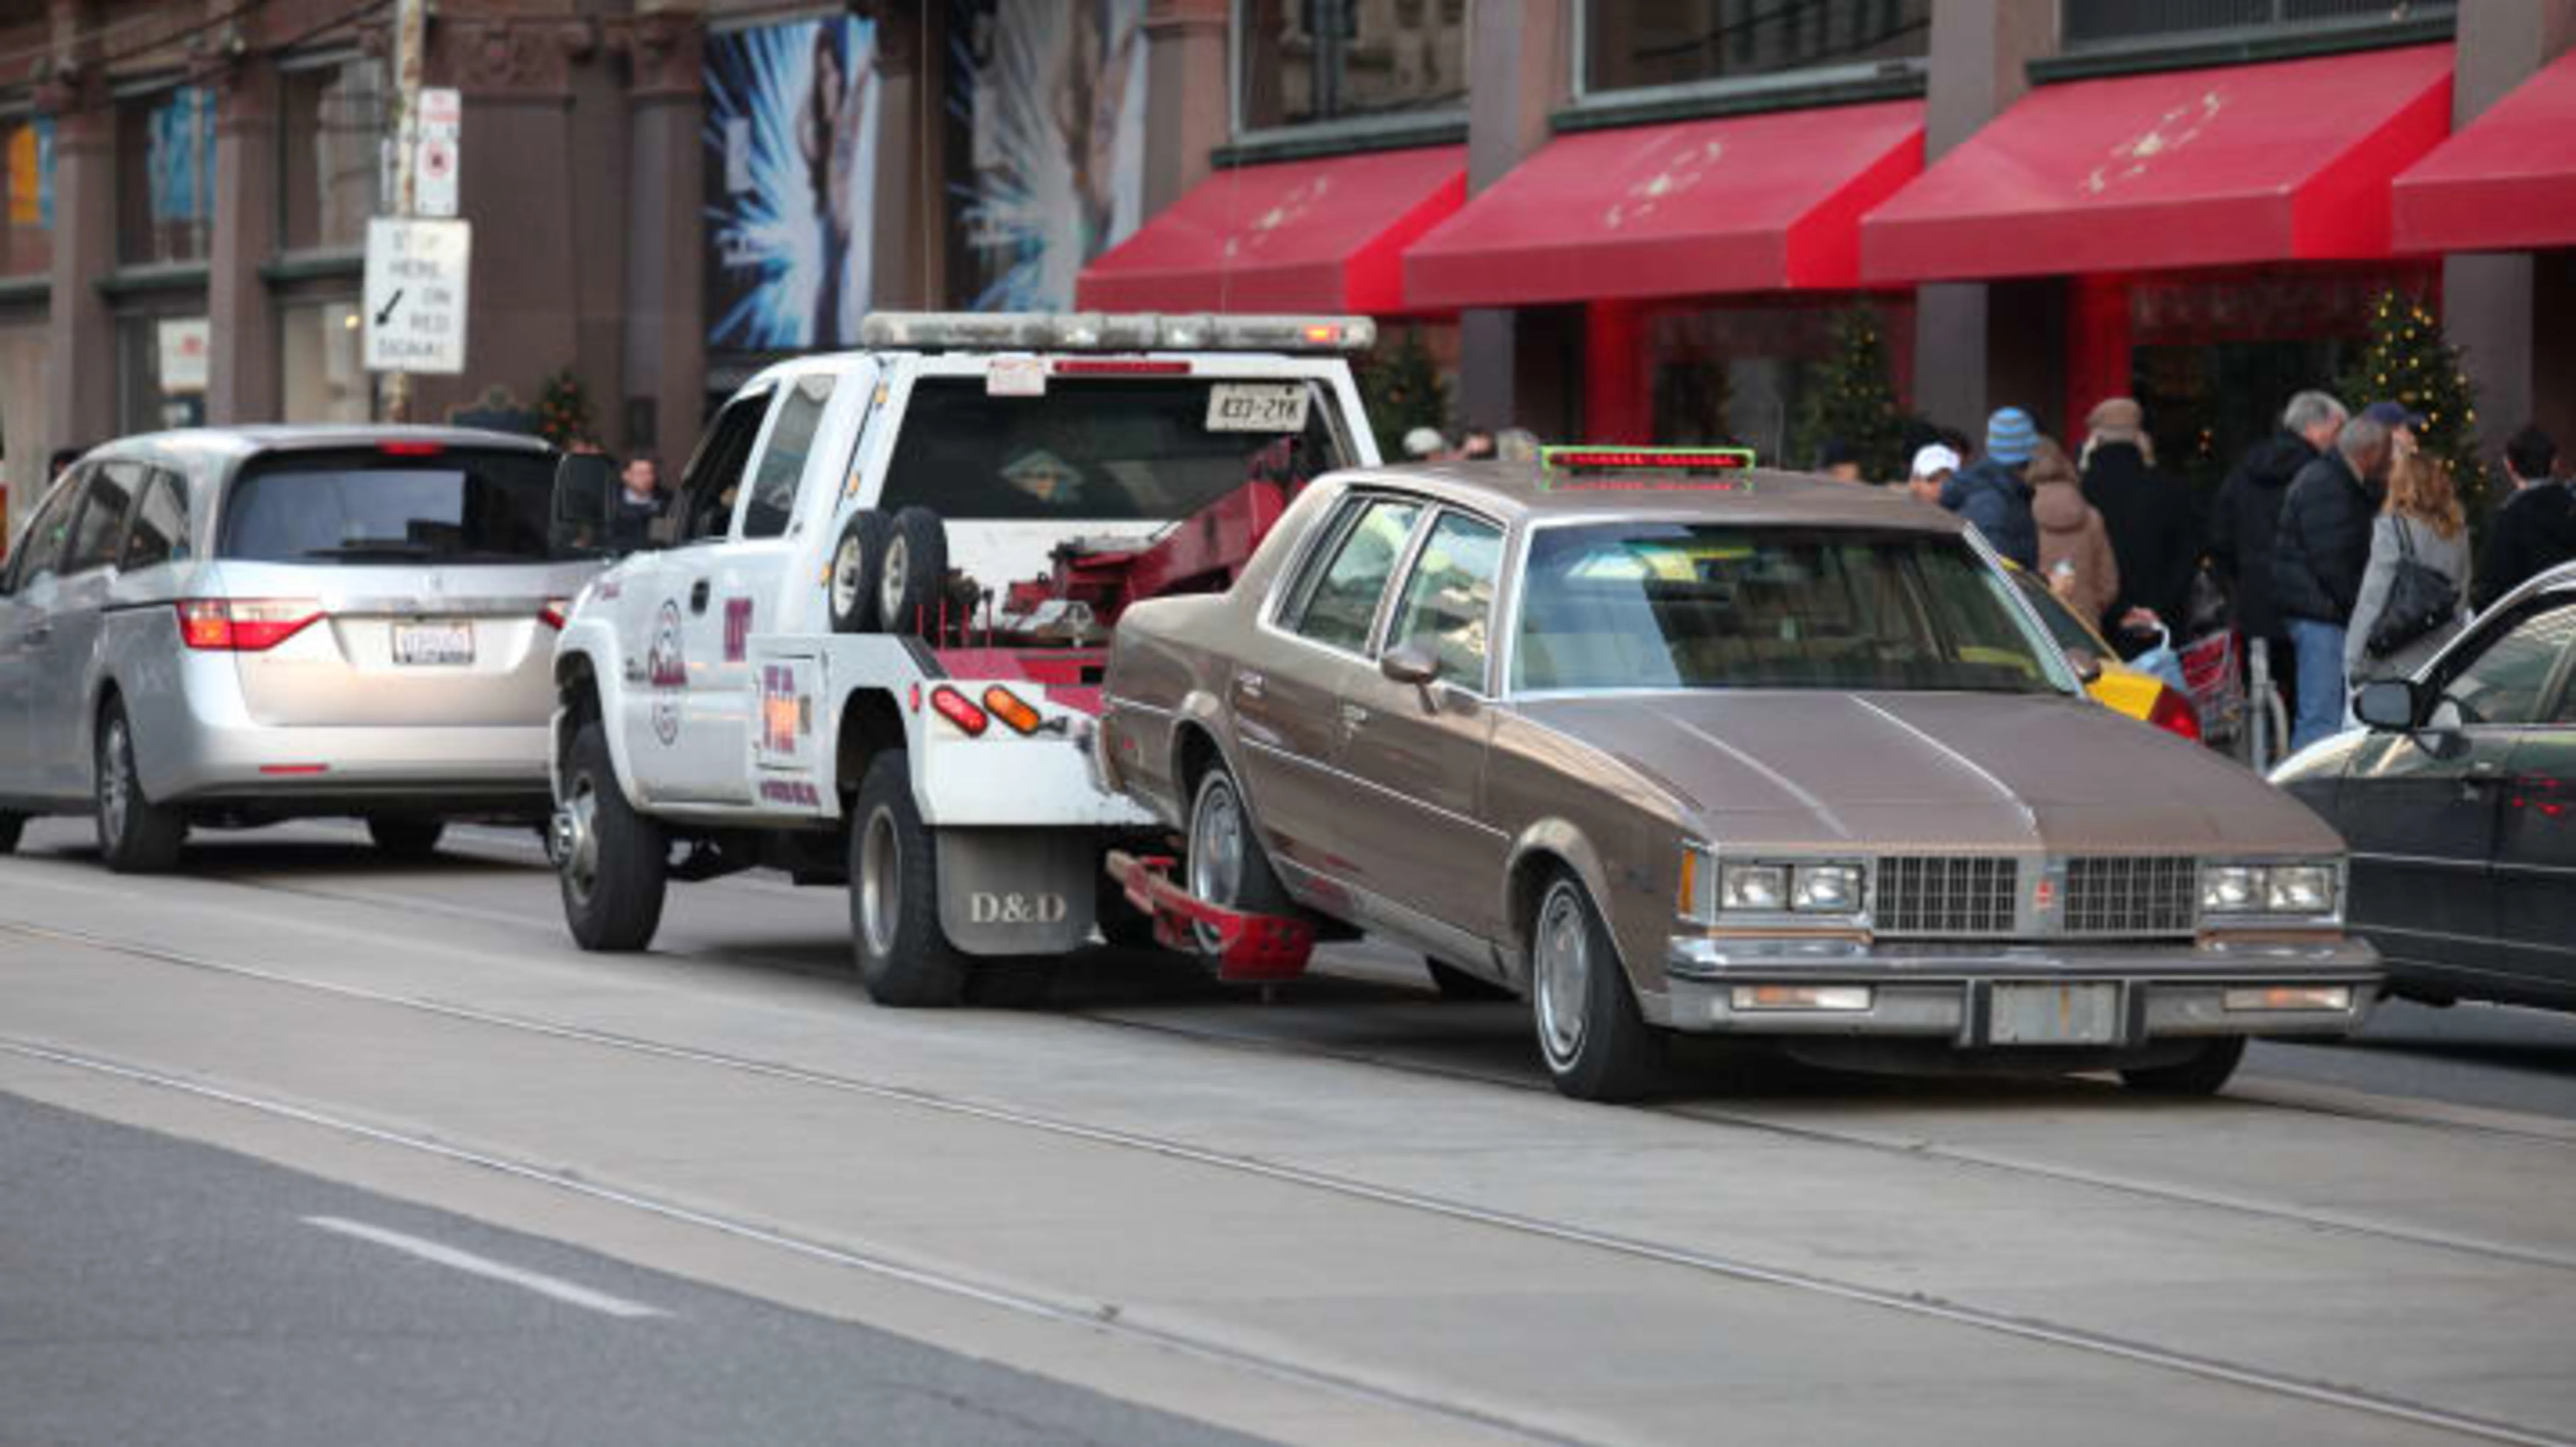 Tow truck  hauling a car on street in downtown Toronto Canada